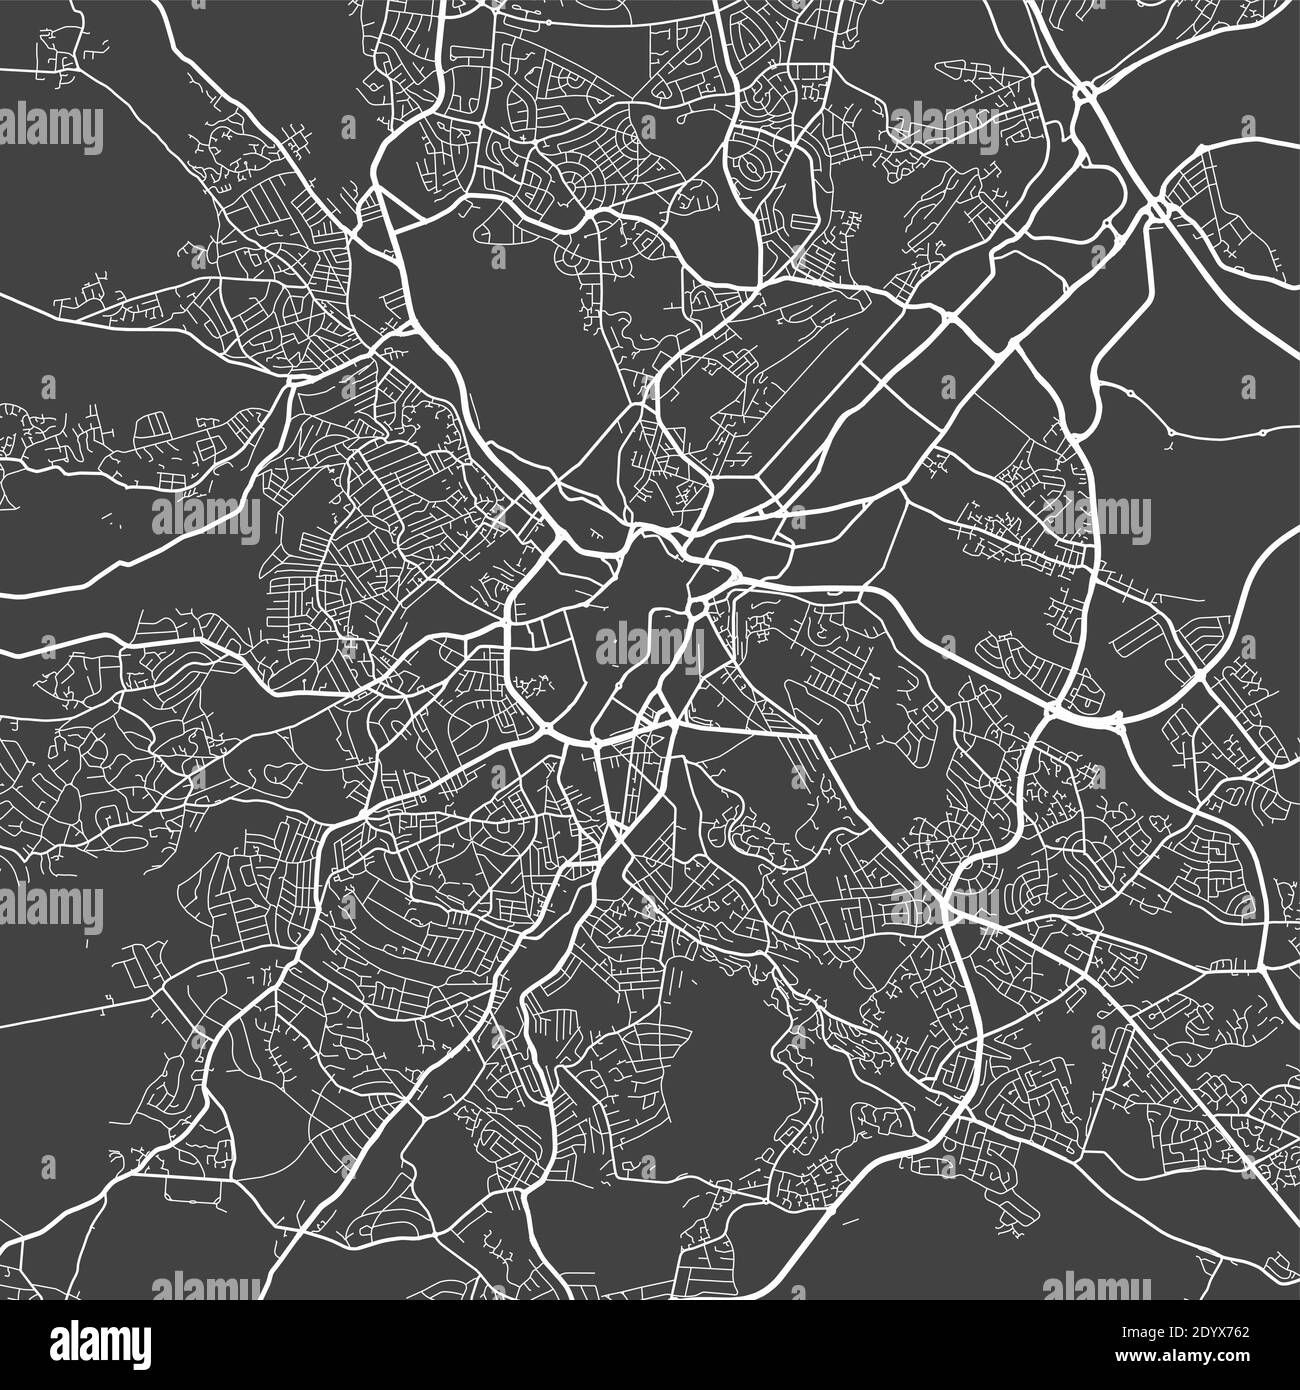 Urban city map of Sheffield. Vector illustration, Sheffield map grayscale art poster. Street map image with roads, metropolitan city area view. Stock Vector